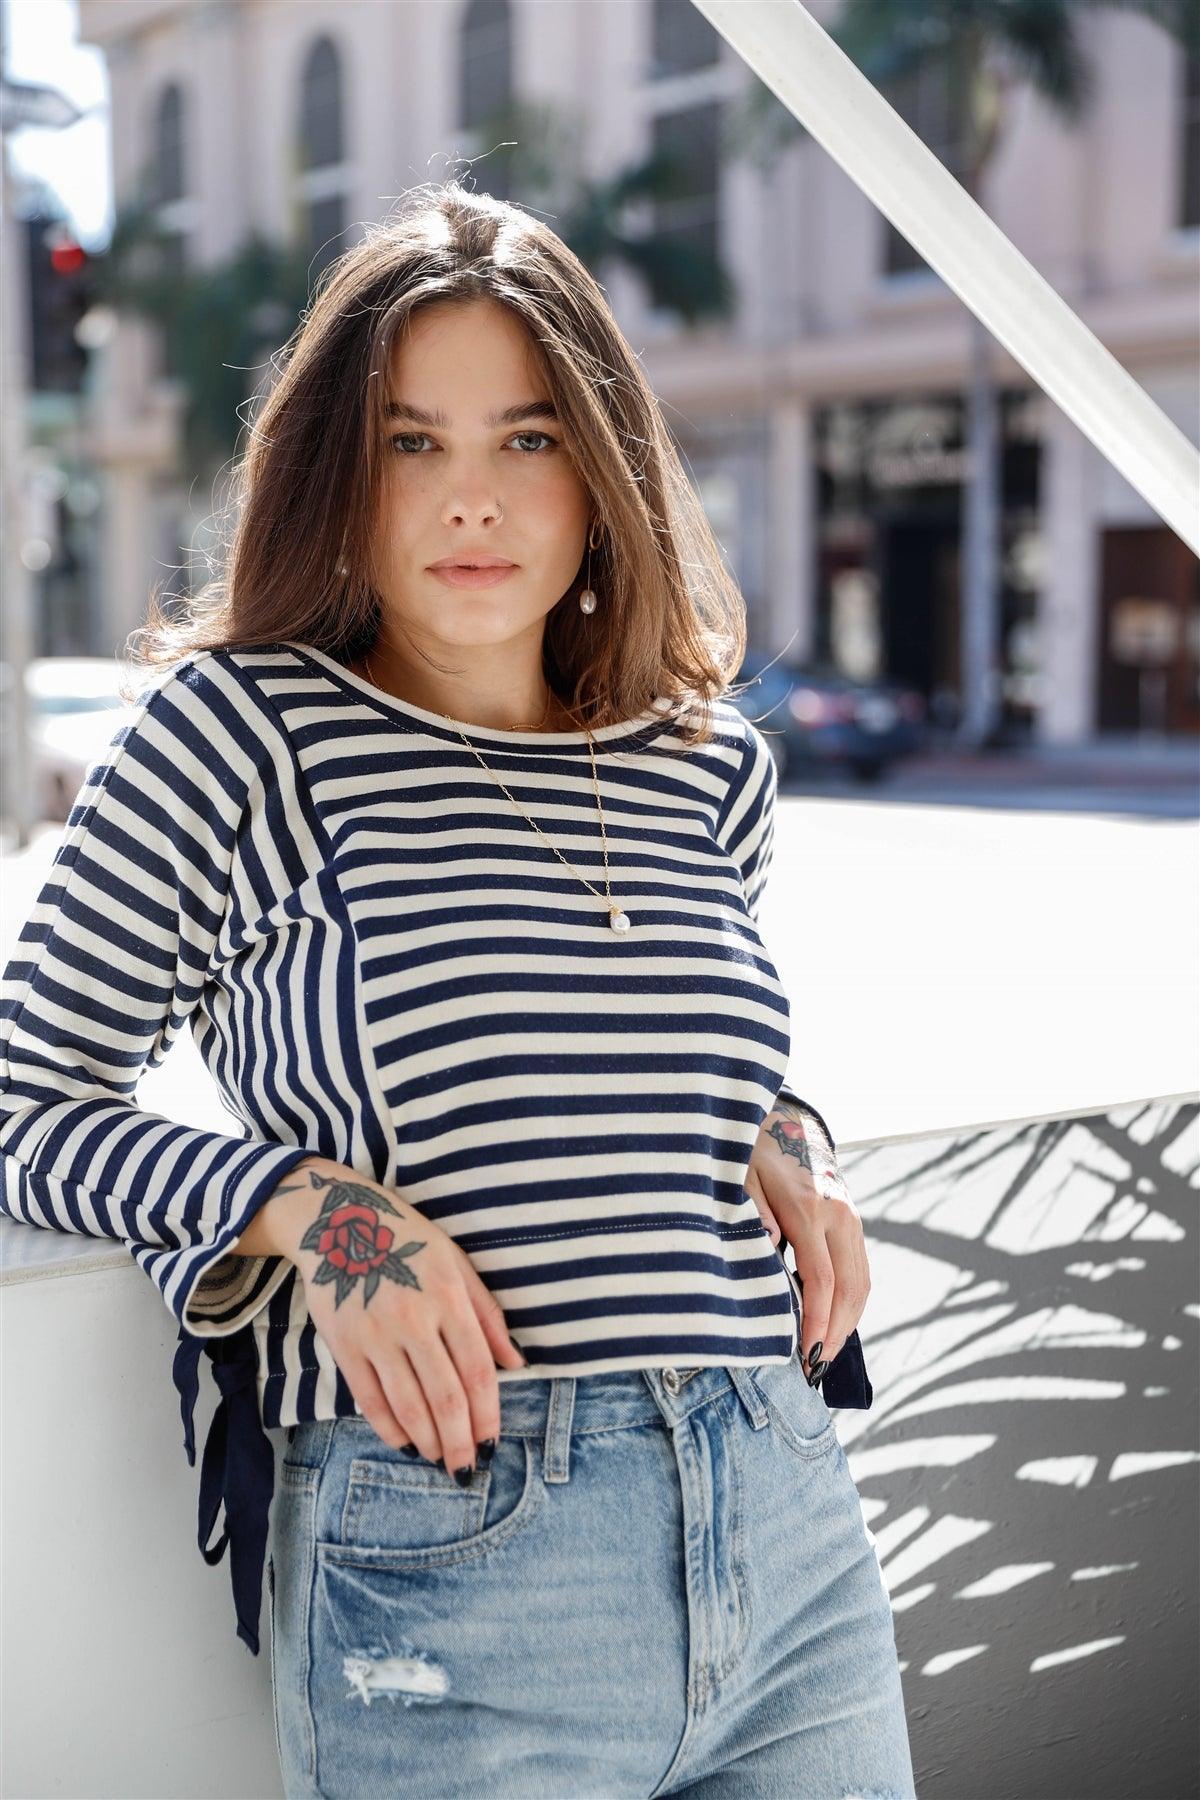 Ivory Navy Striped Side Tie Details Long Sleeve Top /1-3-2